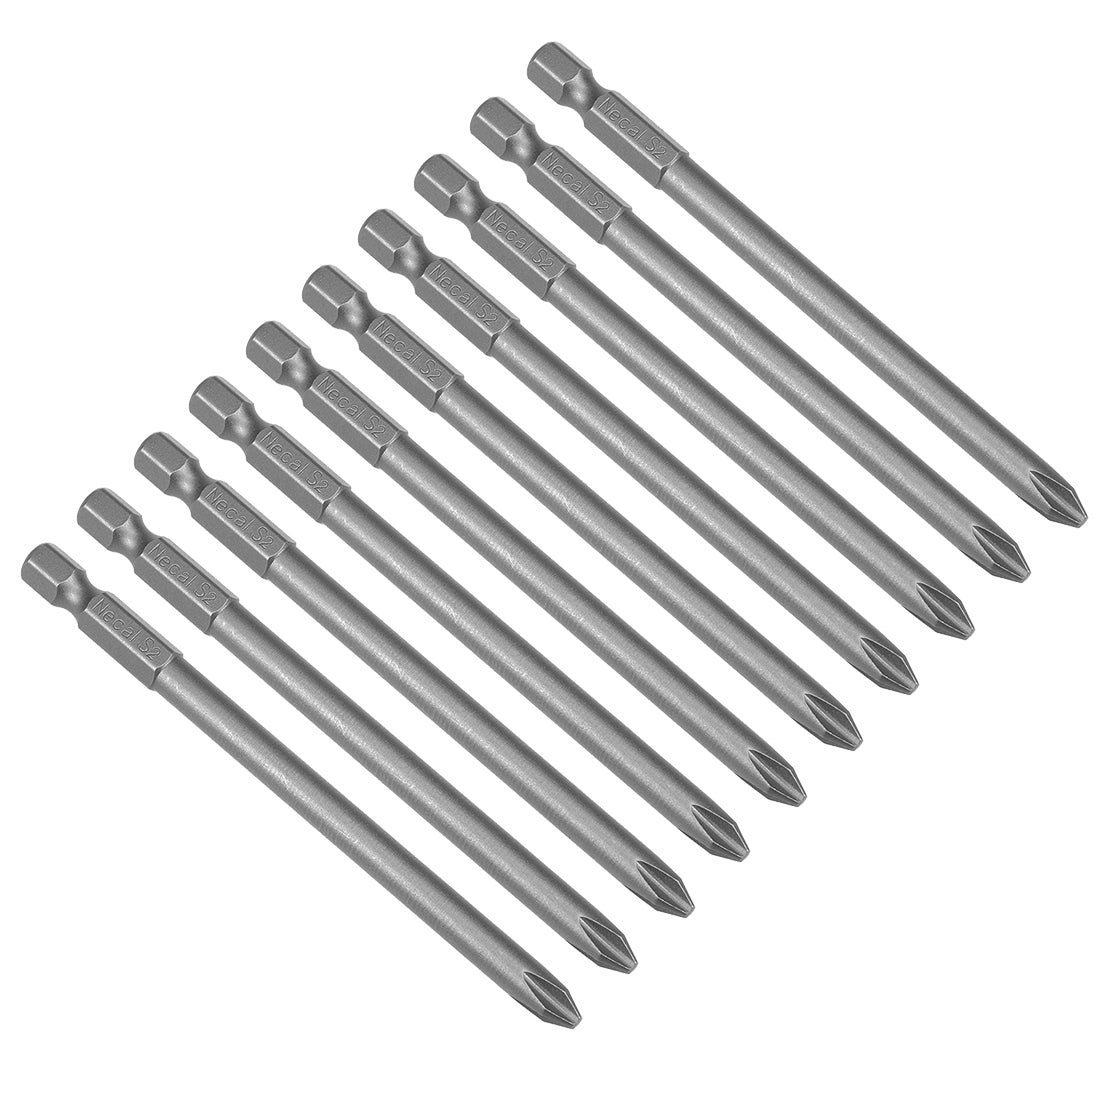 Uxcell Uxcell 10pcs 100mm 1/4" Hex Shank 4.5mm PH1 Magnetic Phillips Head Screwdriver Bits S2